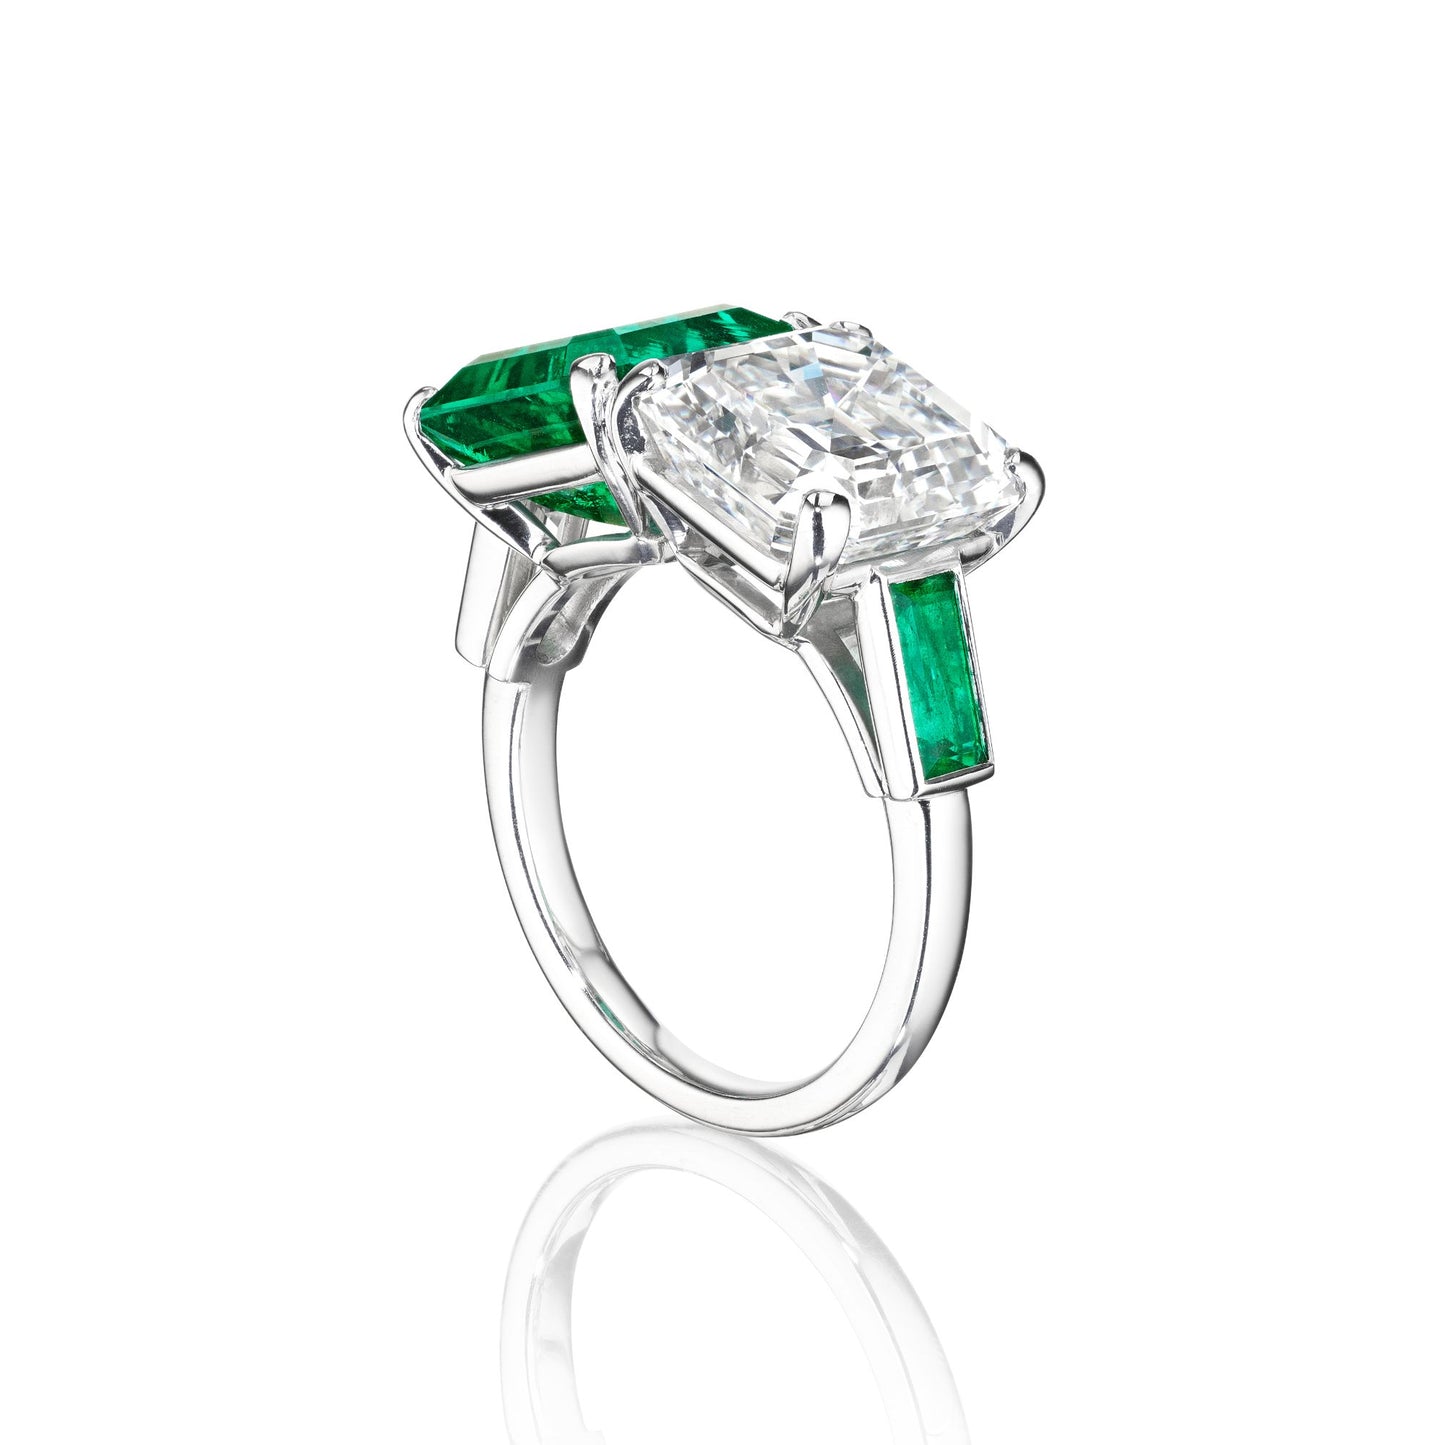 TWIN EMERALD AND DIAMOND RING BY SIEGELSON, NEW YORK